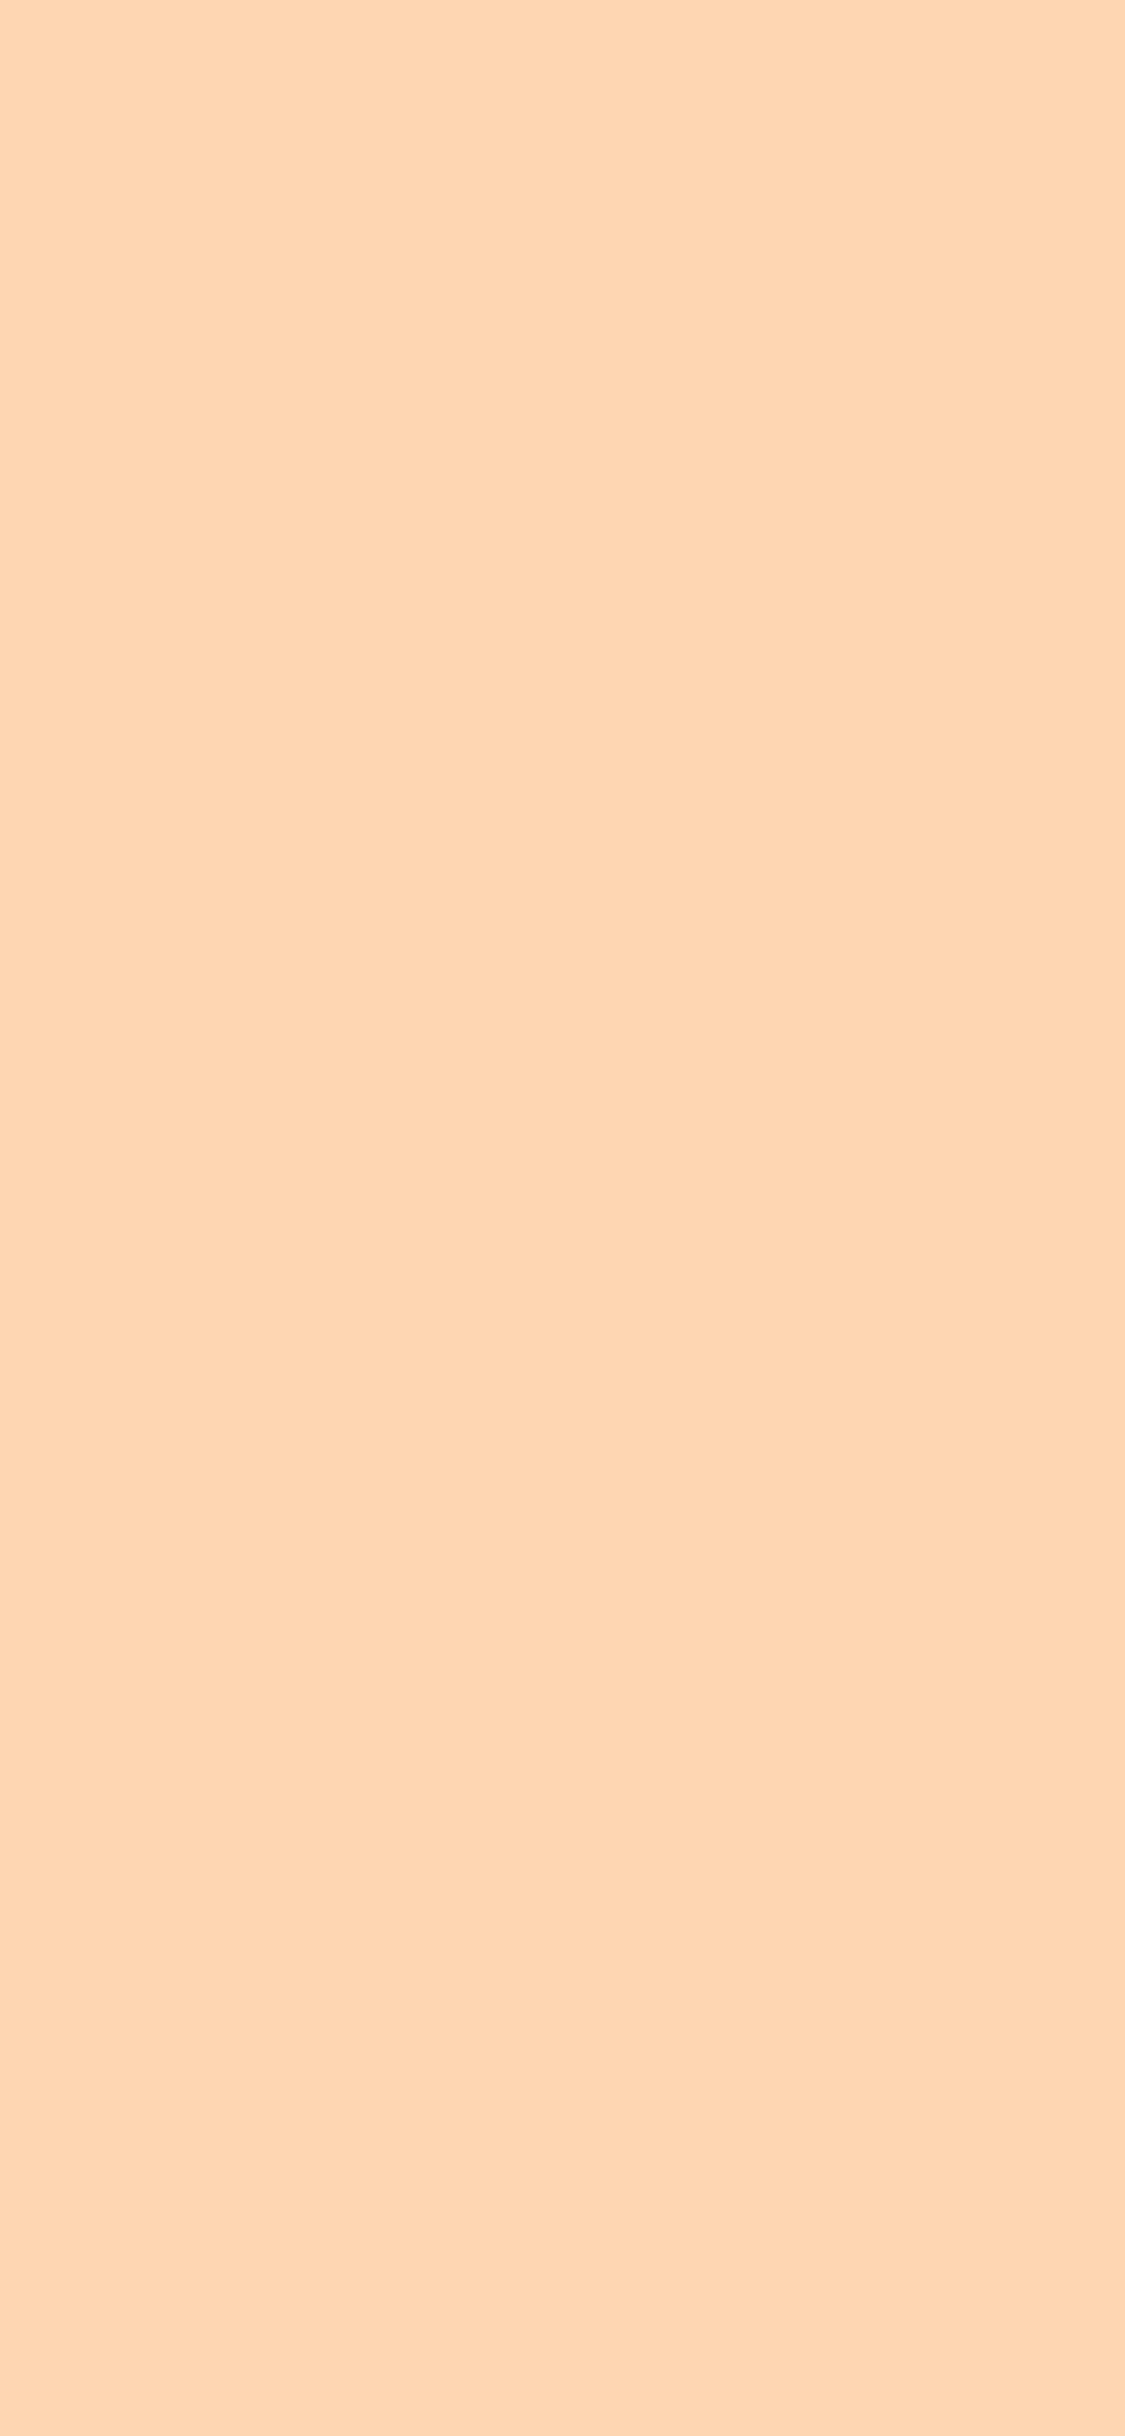 1125x2436 Light Apricot Solid Color Background